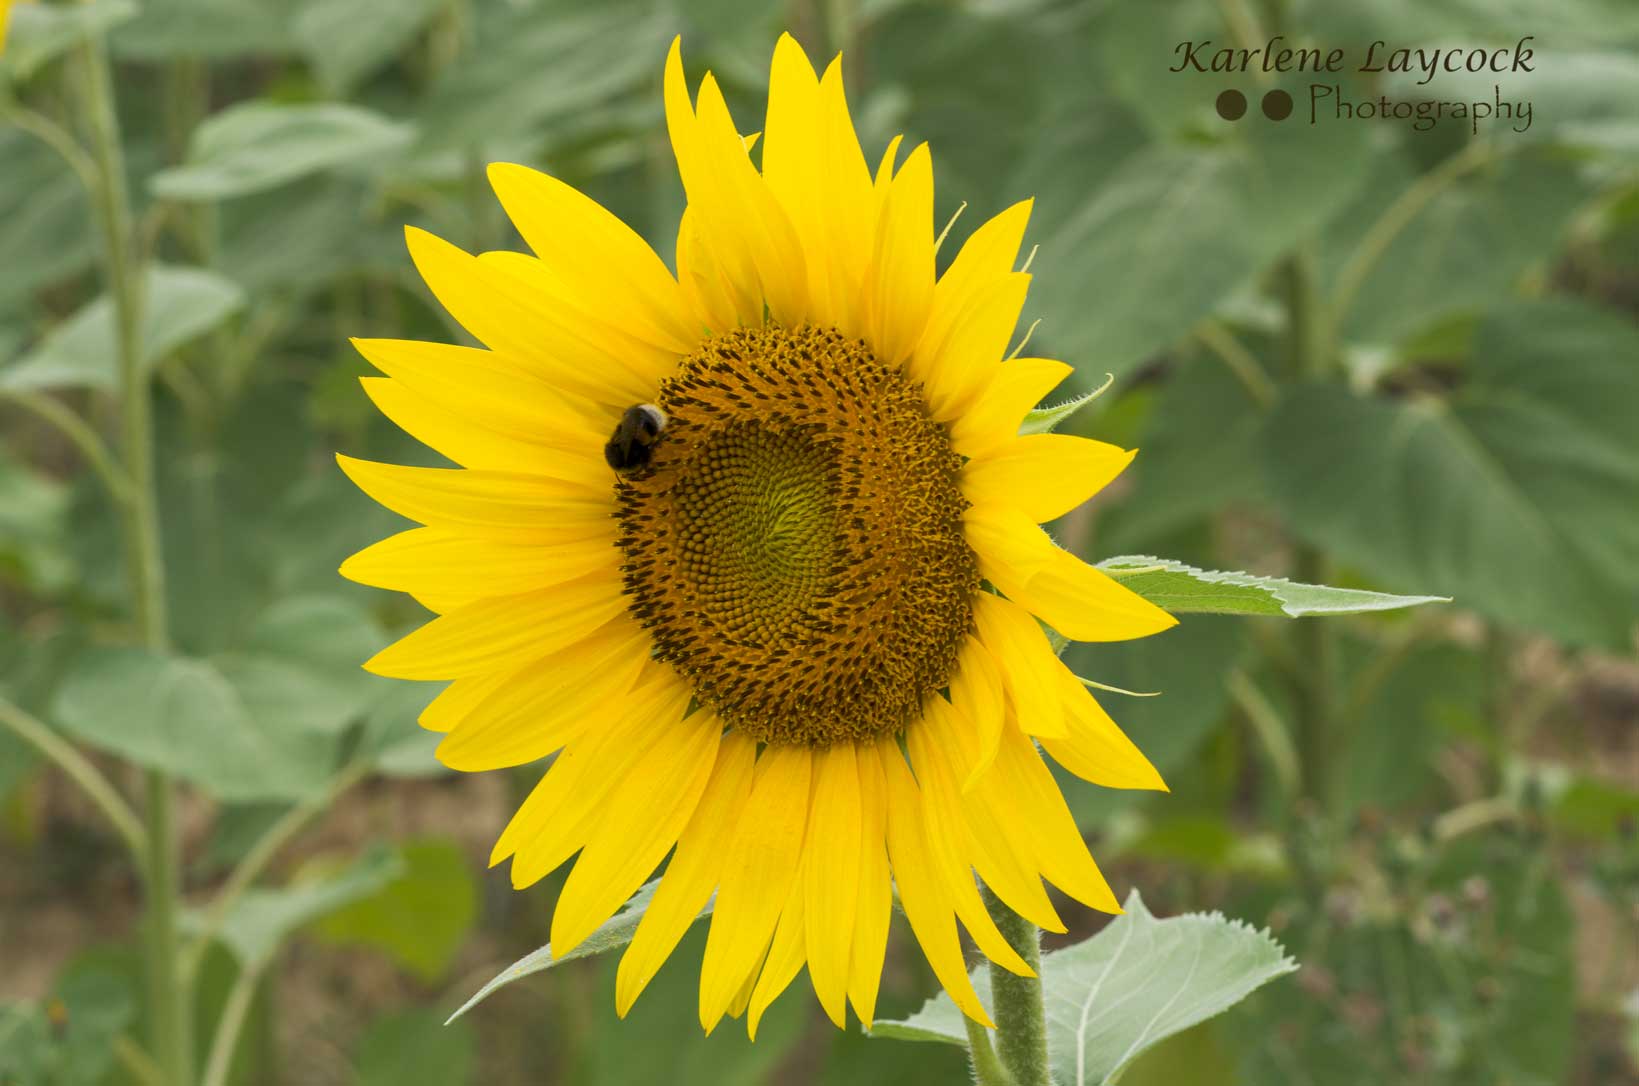 Photograph of a Bee on a Sunflower Captured in Eymet, France